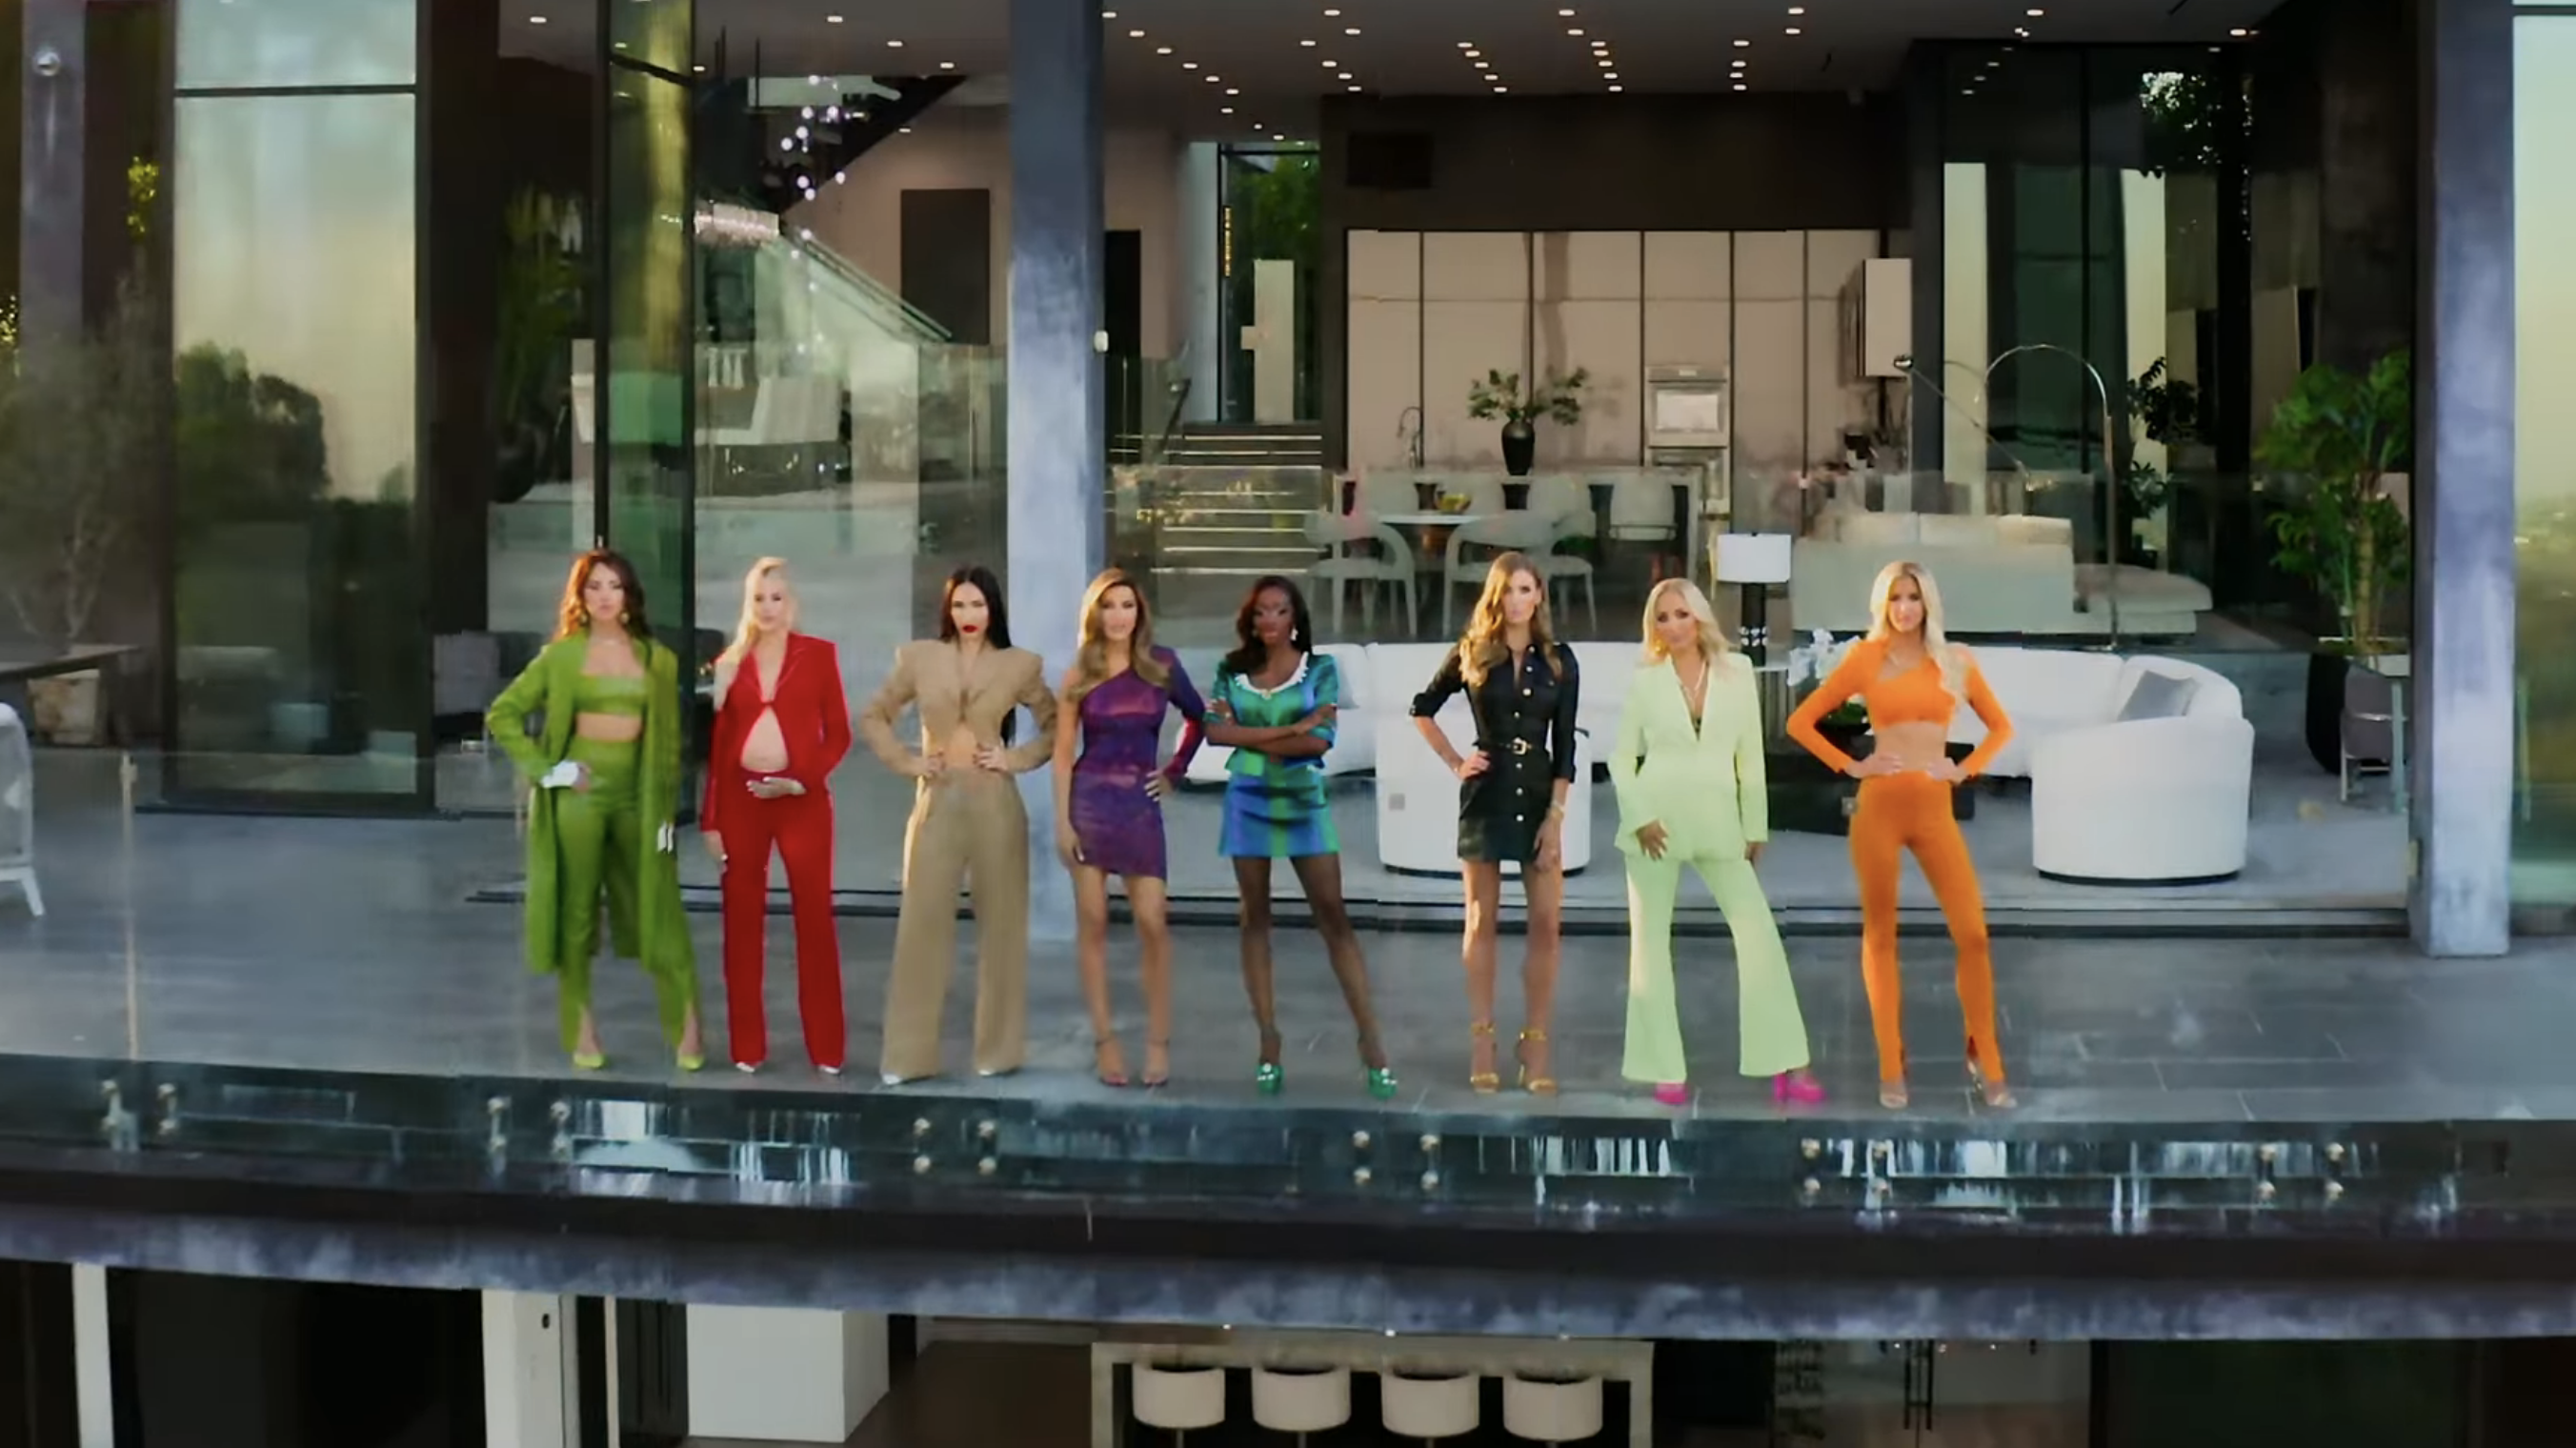 Selling Sunset Season 6: What on earth is happening with the outfits?